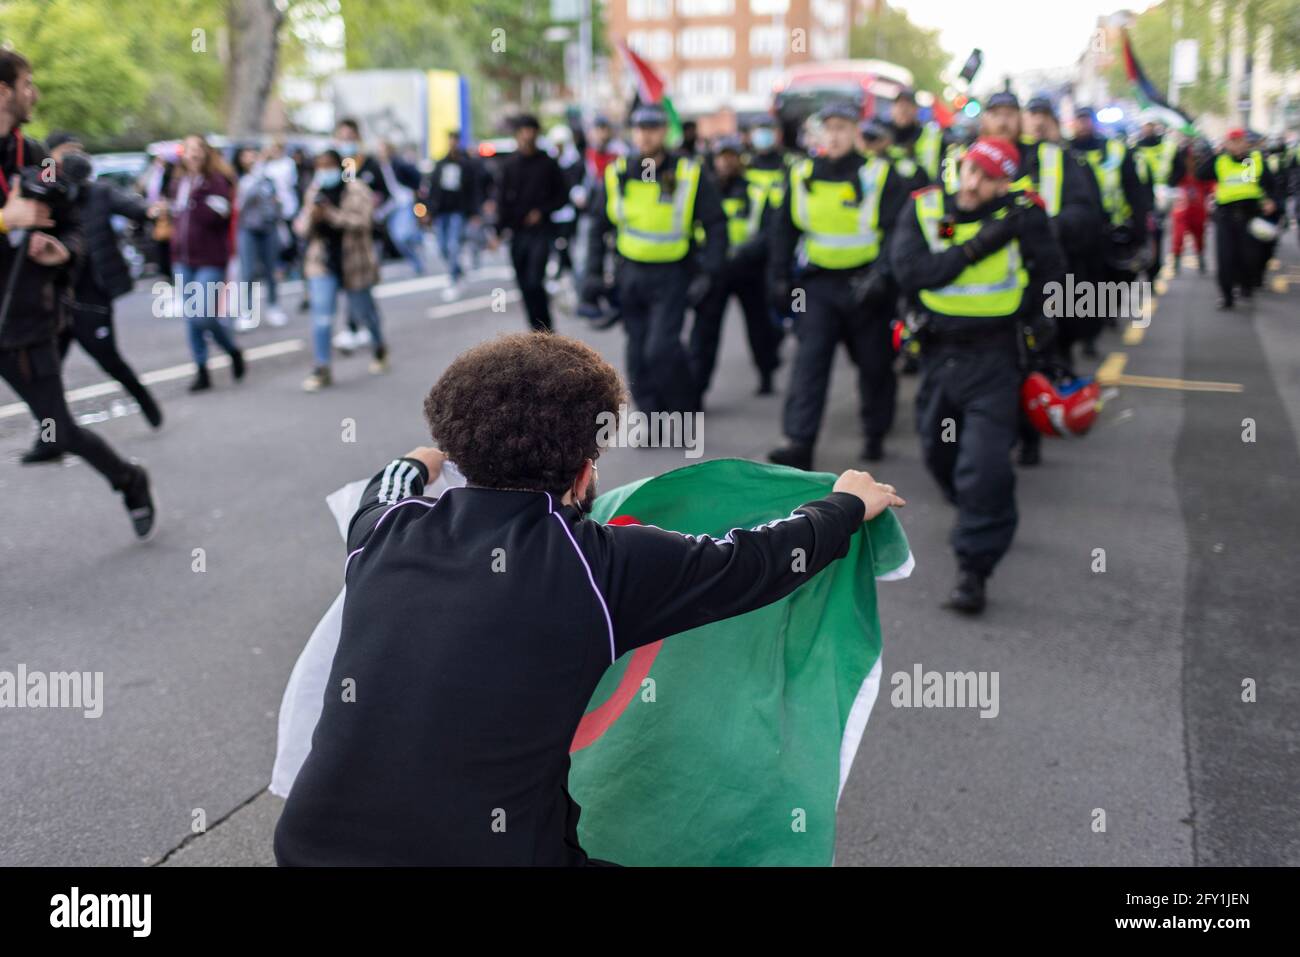 A protester waves an Algerian flag in front of police, Free Palestine Protest, London, 22 May 2021 Stock Photo